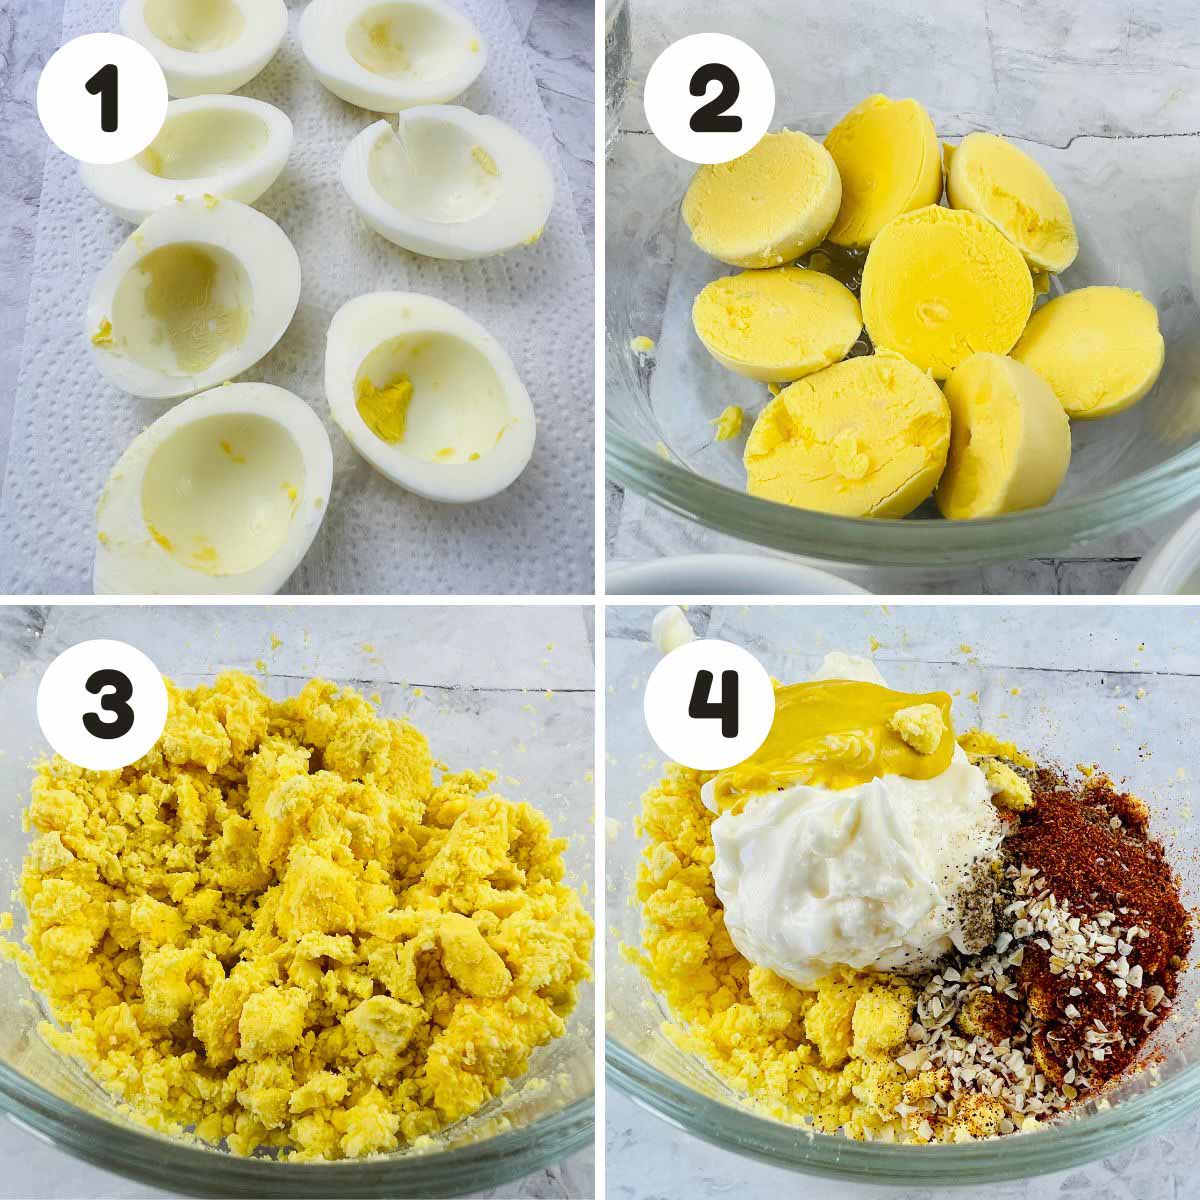 Steps to make the deviled eggs mixture.